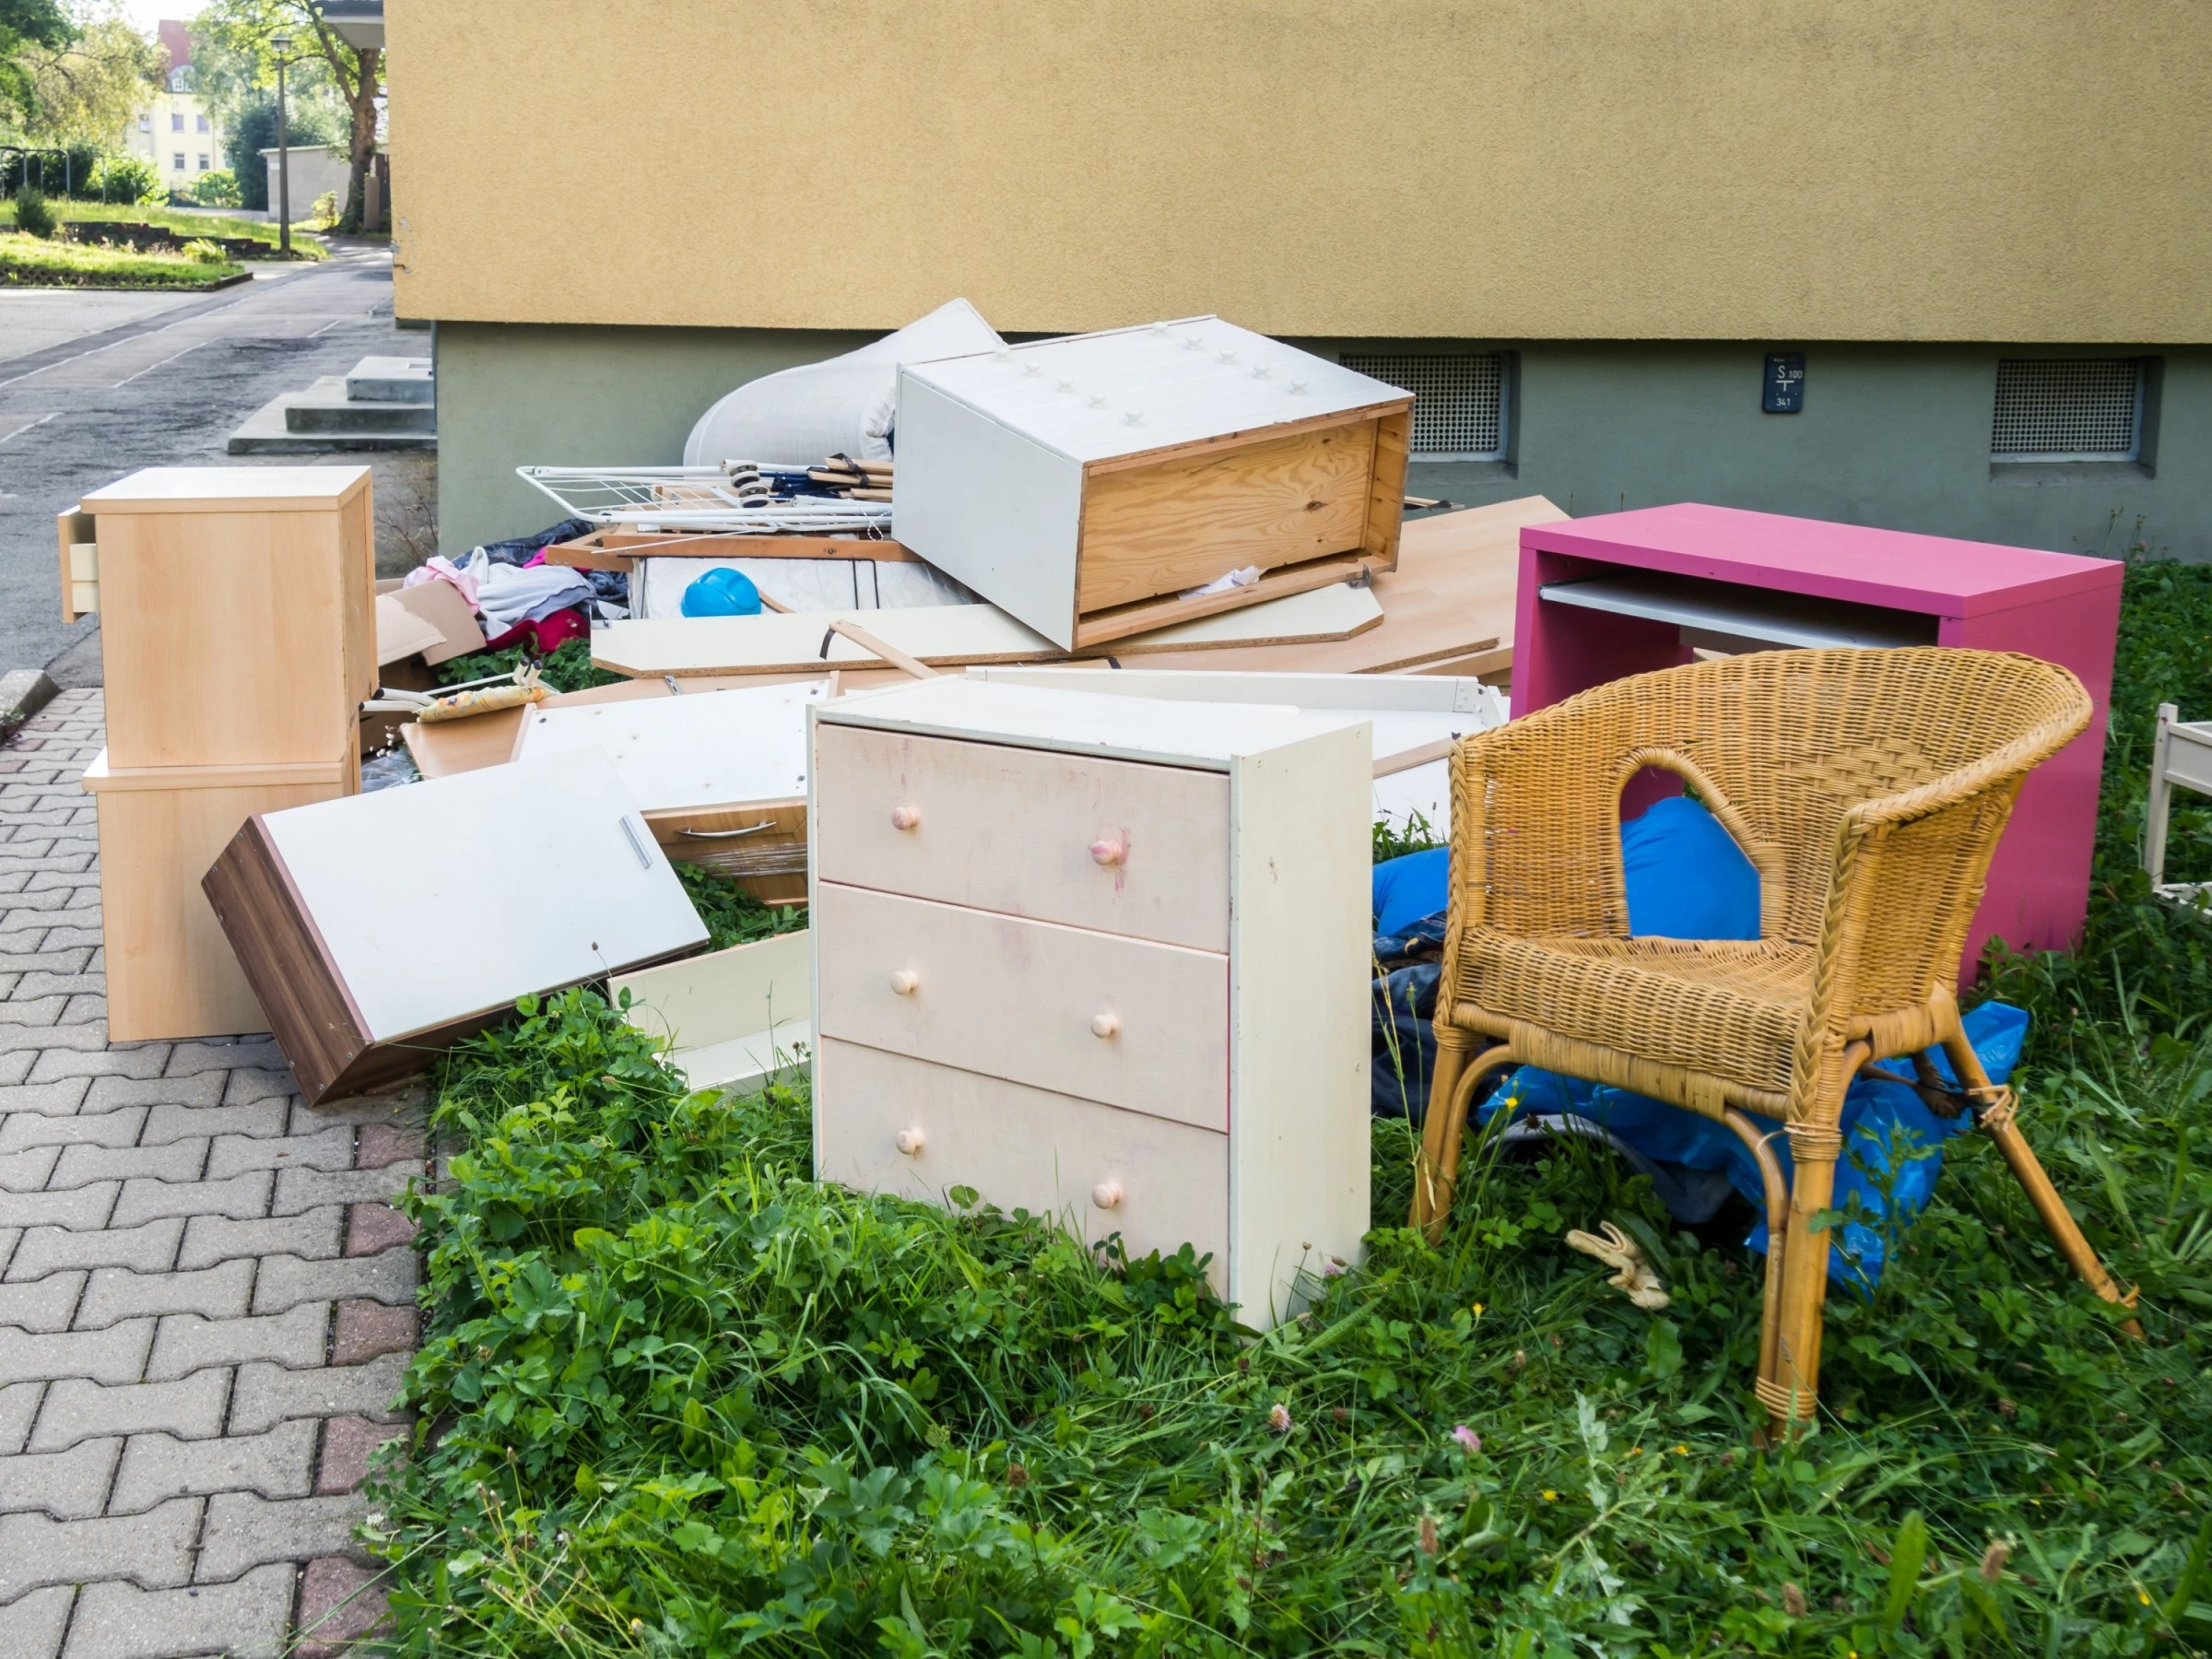 Junk Removal Brampton: Get Rid of Your Unwanted Items Hassle-Free